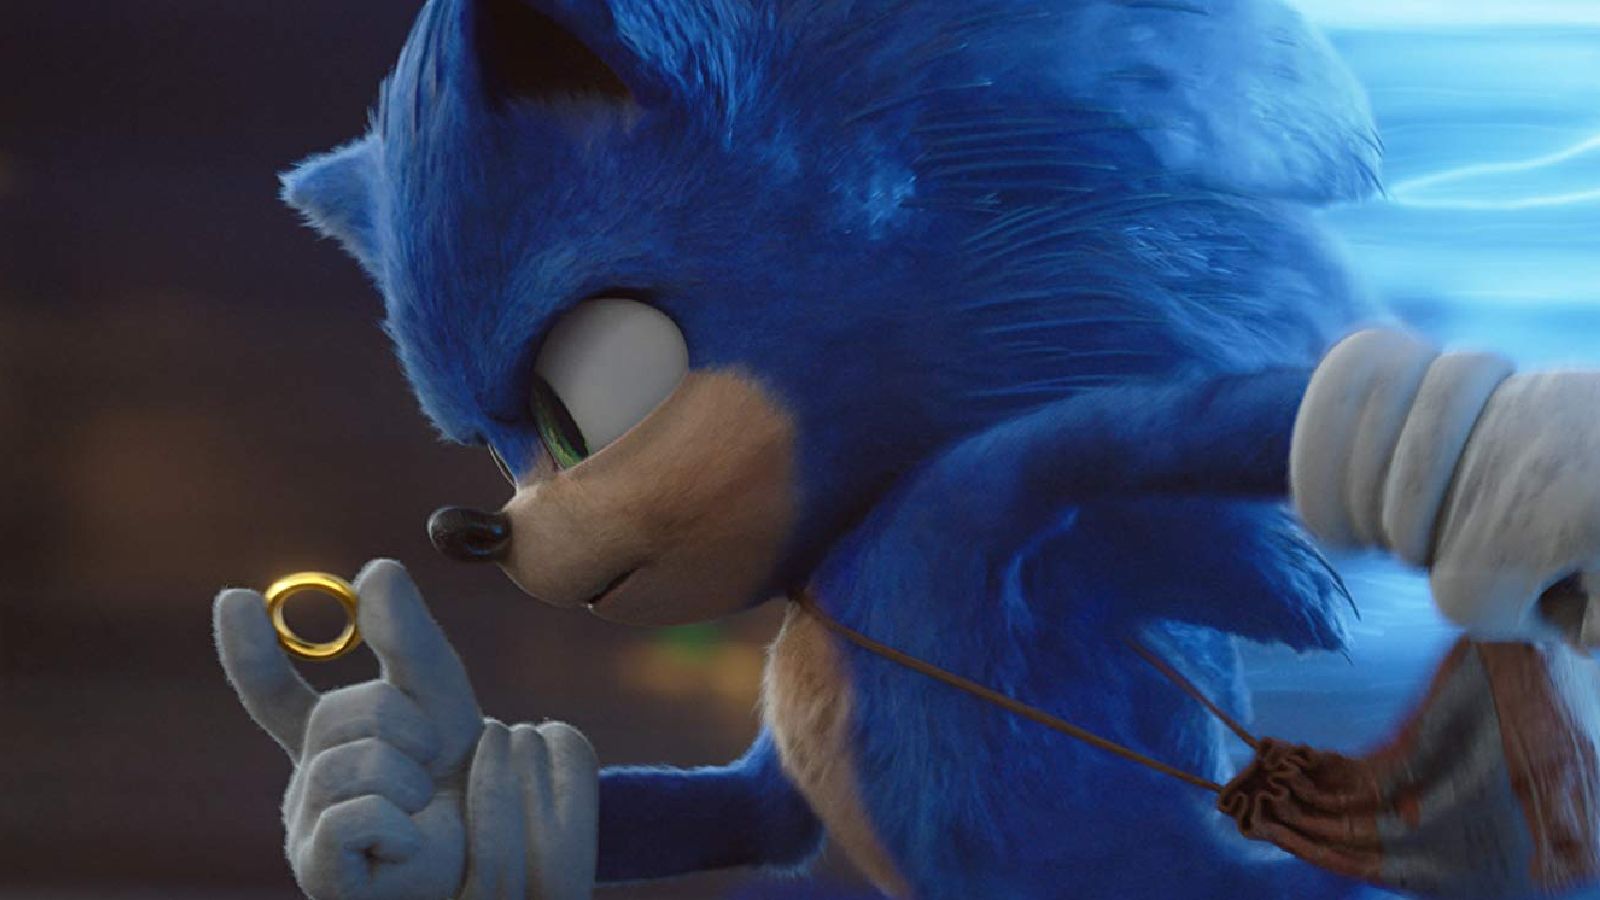 I came here for the gay hedgehogs — snartles: Sonic movie 3 thing